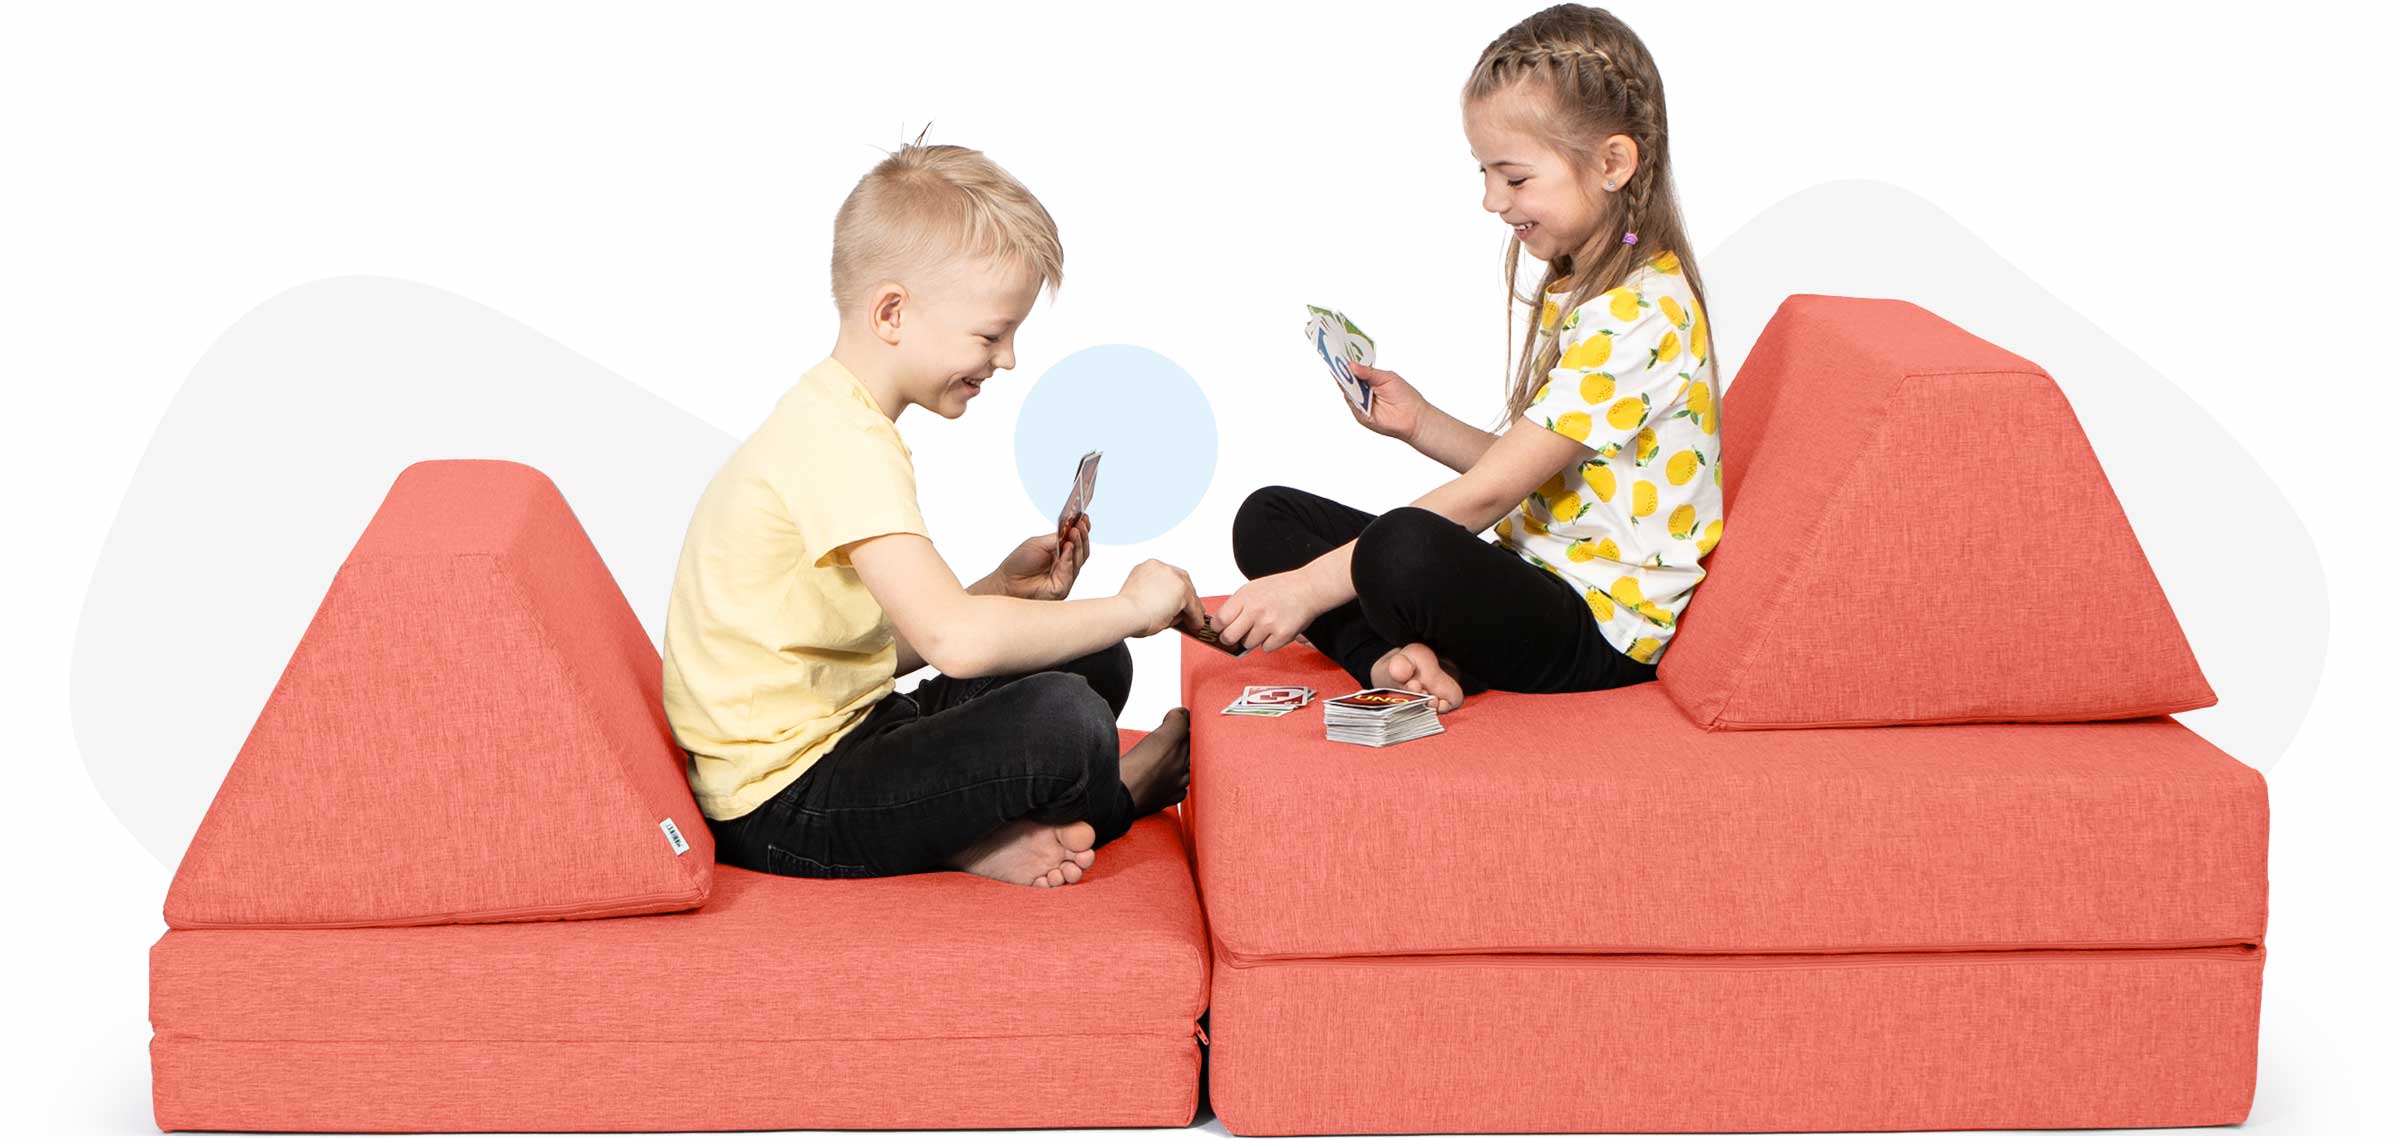 Kids sitting and playing cards on a coral Monboxy kid play couch